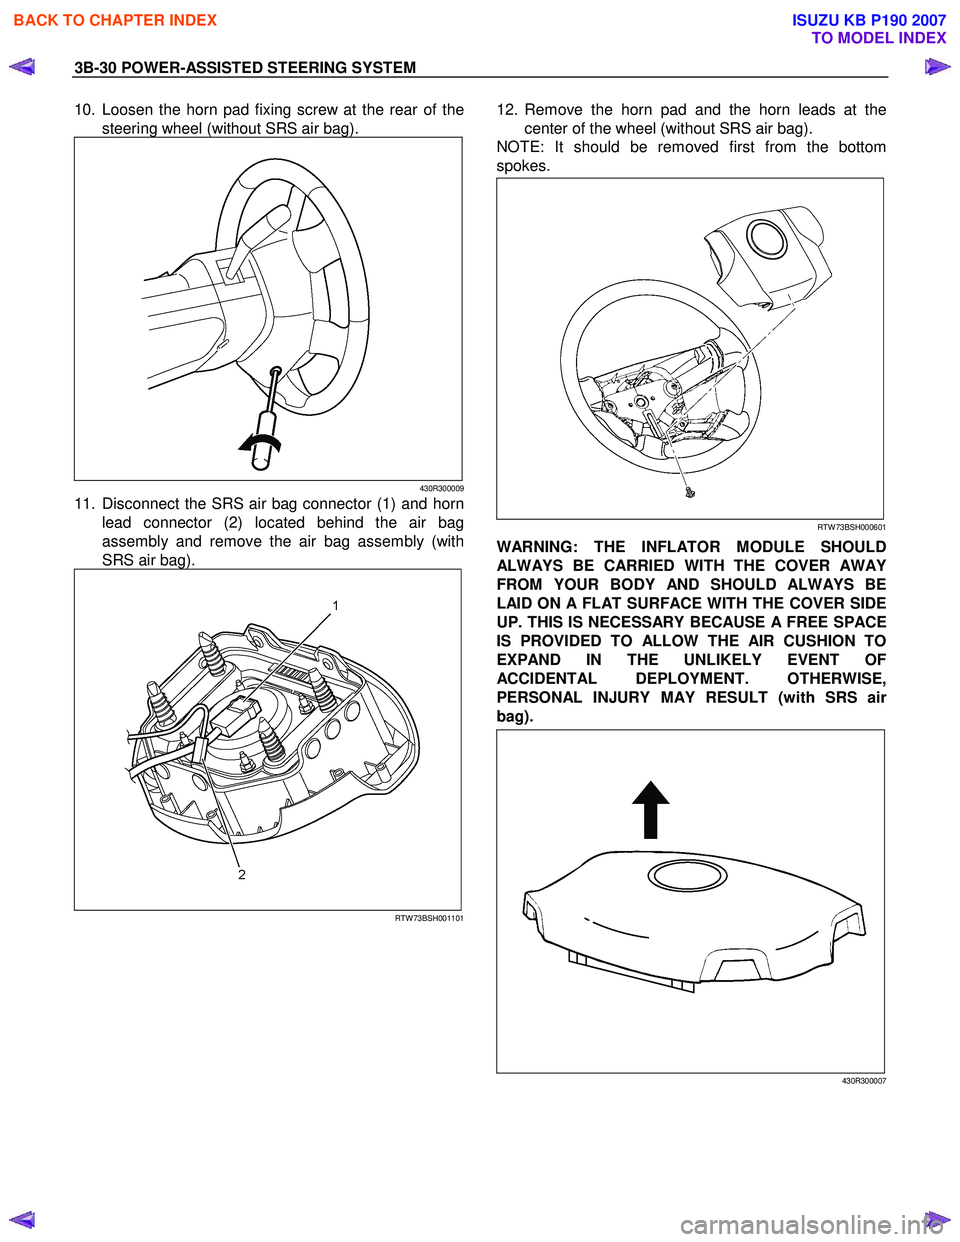 ISUZU KB P190 2007  Workshop Repair Manual 3B-30 POWER-ASSISTED STEERING SYSTEM 
10.  Loosen the horn pad fixing screw at the rear of the
steering wheel (without SRS air bag). 
430R300009
11.  Disconnect the SRS air bag connector (1) and horn 